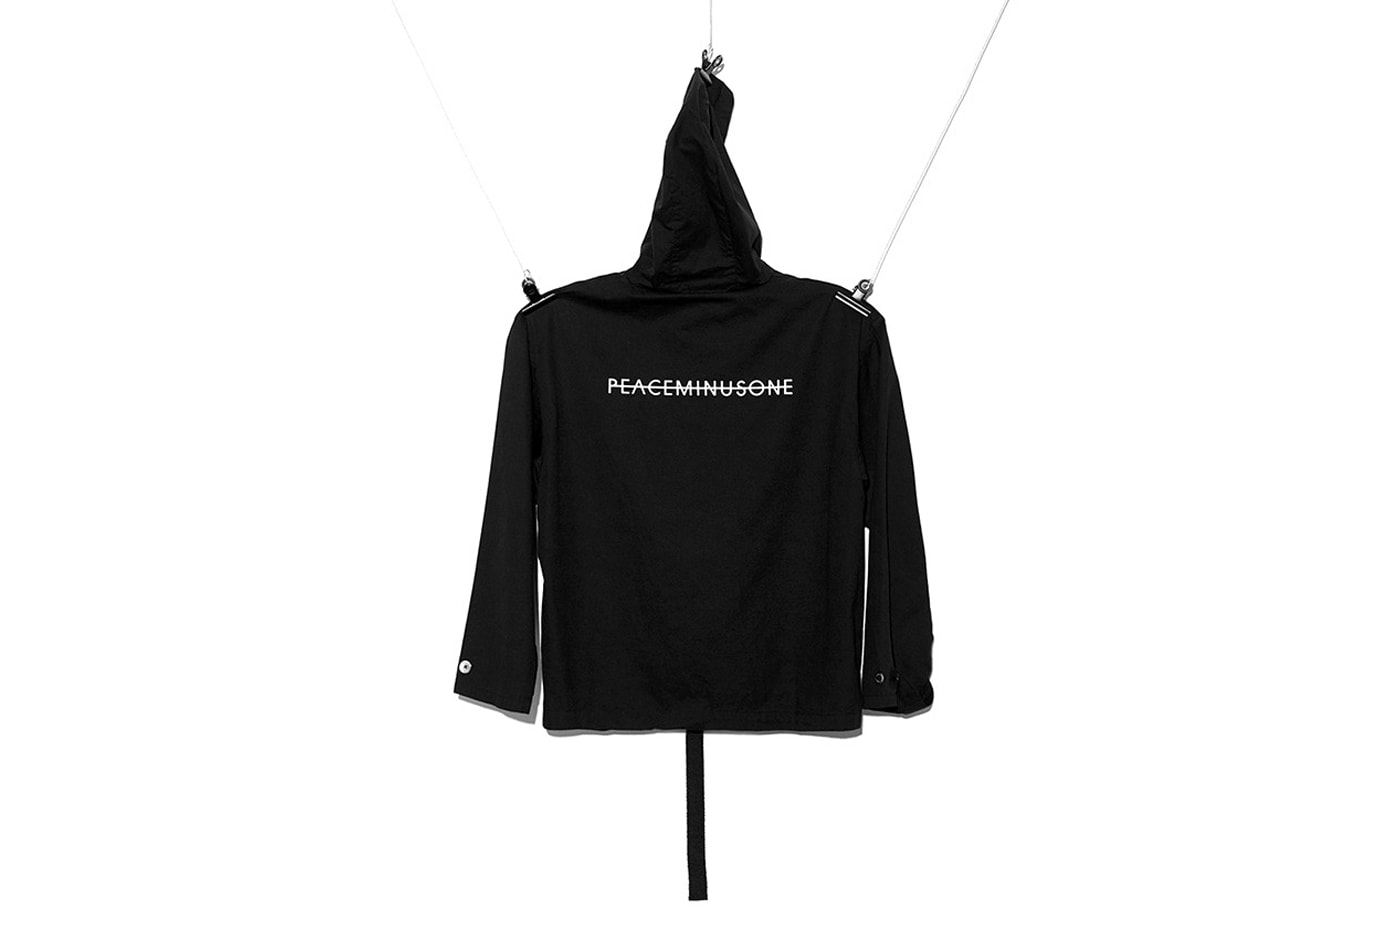 PEACEMINUSONE by G-Dragon Collection Restock missed it chance O ring belt jackets hoodies work pants 21 products quilted peace logo daisy peace minus one old font online store available release